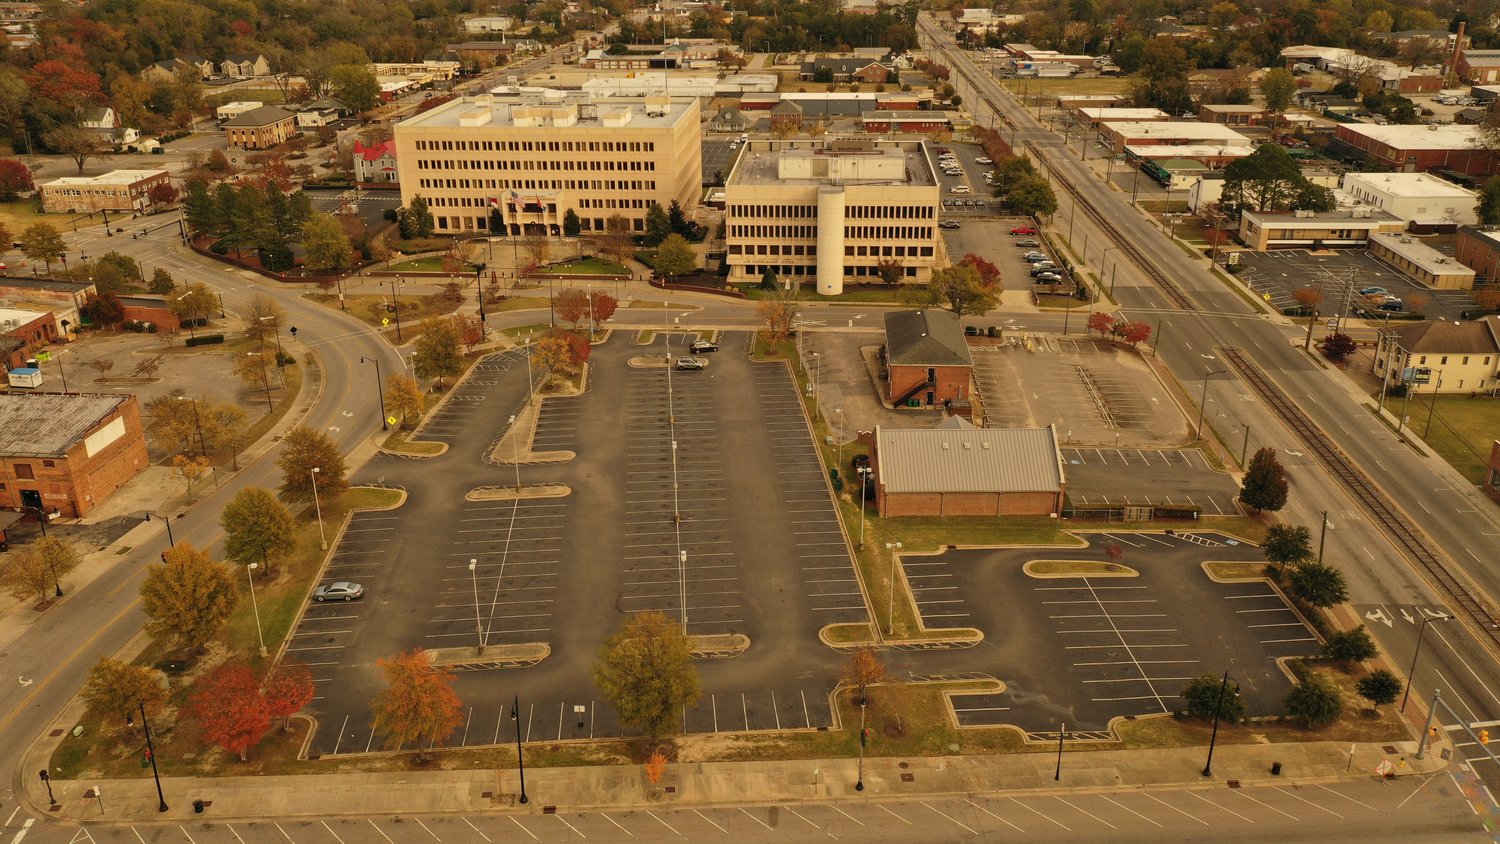 The Crown Event Center, which will replace the aging theater and arena at the Crown Coliseum Complex, will be built downtown. The county Board of Commissioners announced the site selection on Monday.